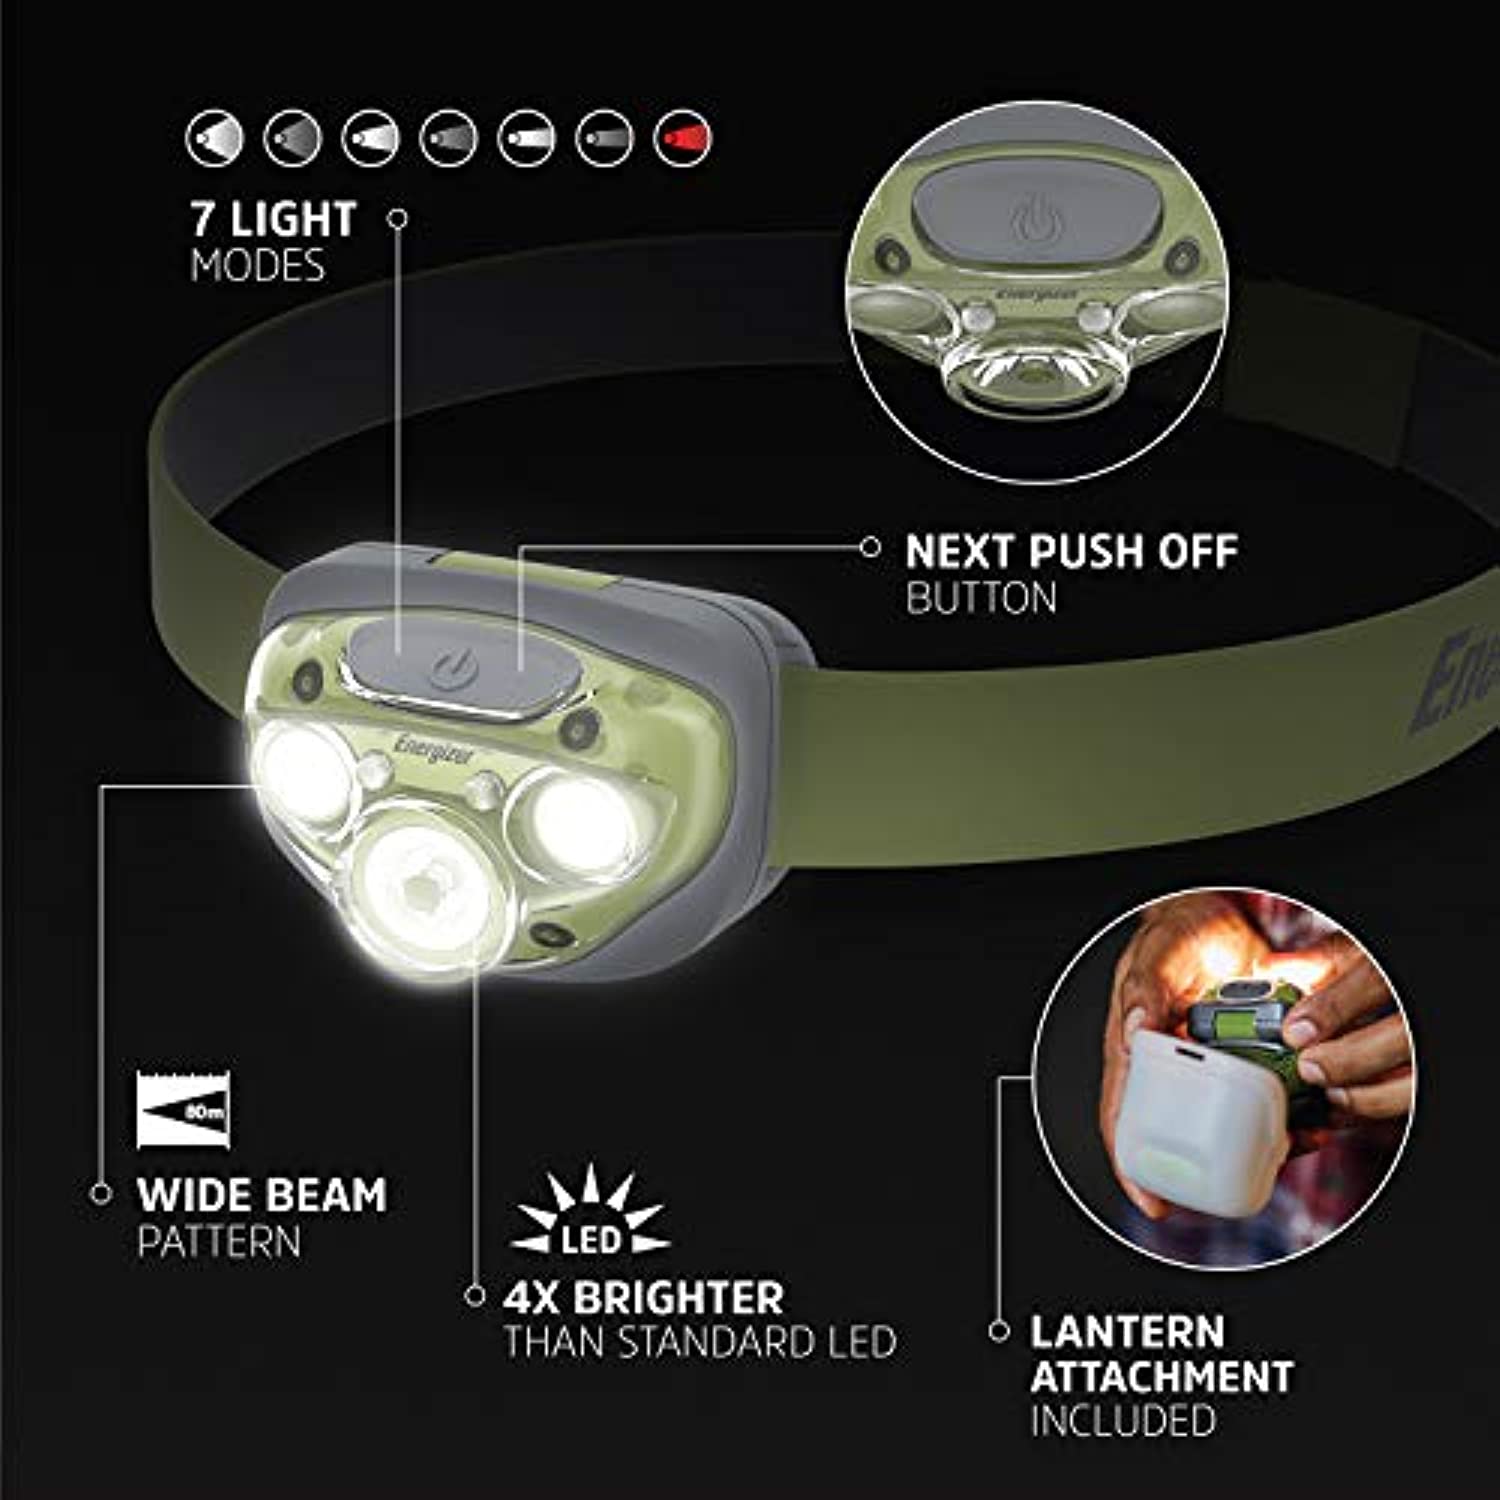 Energizer LED Headlamp and Lantern Case, Super Bright Rugged Head Light,  Batteries Included